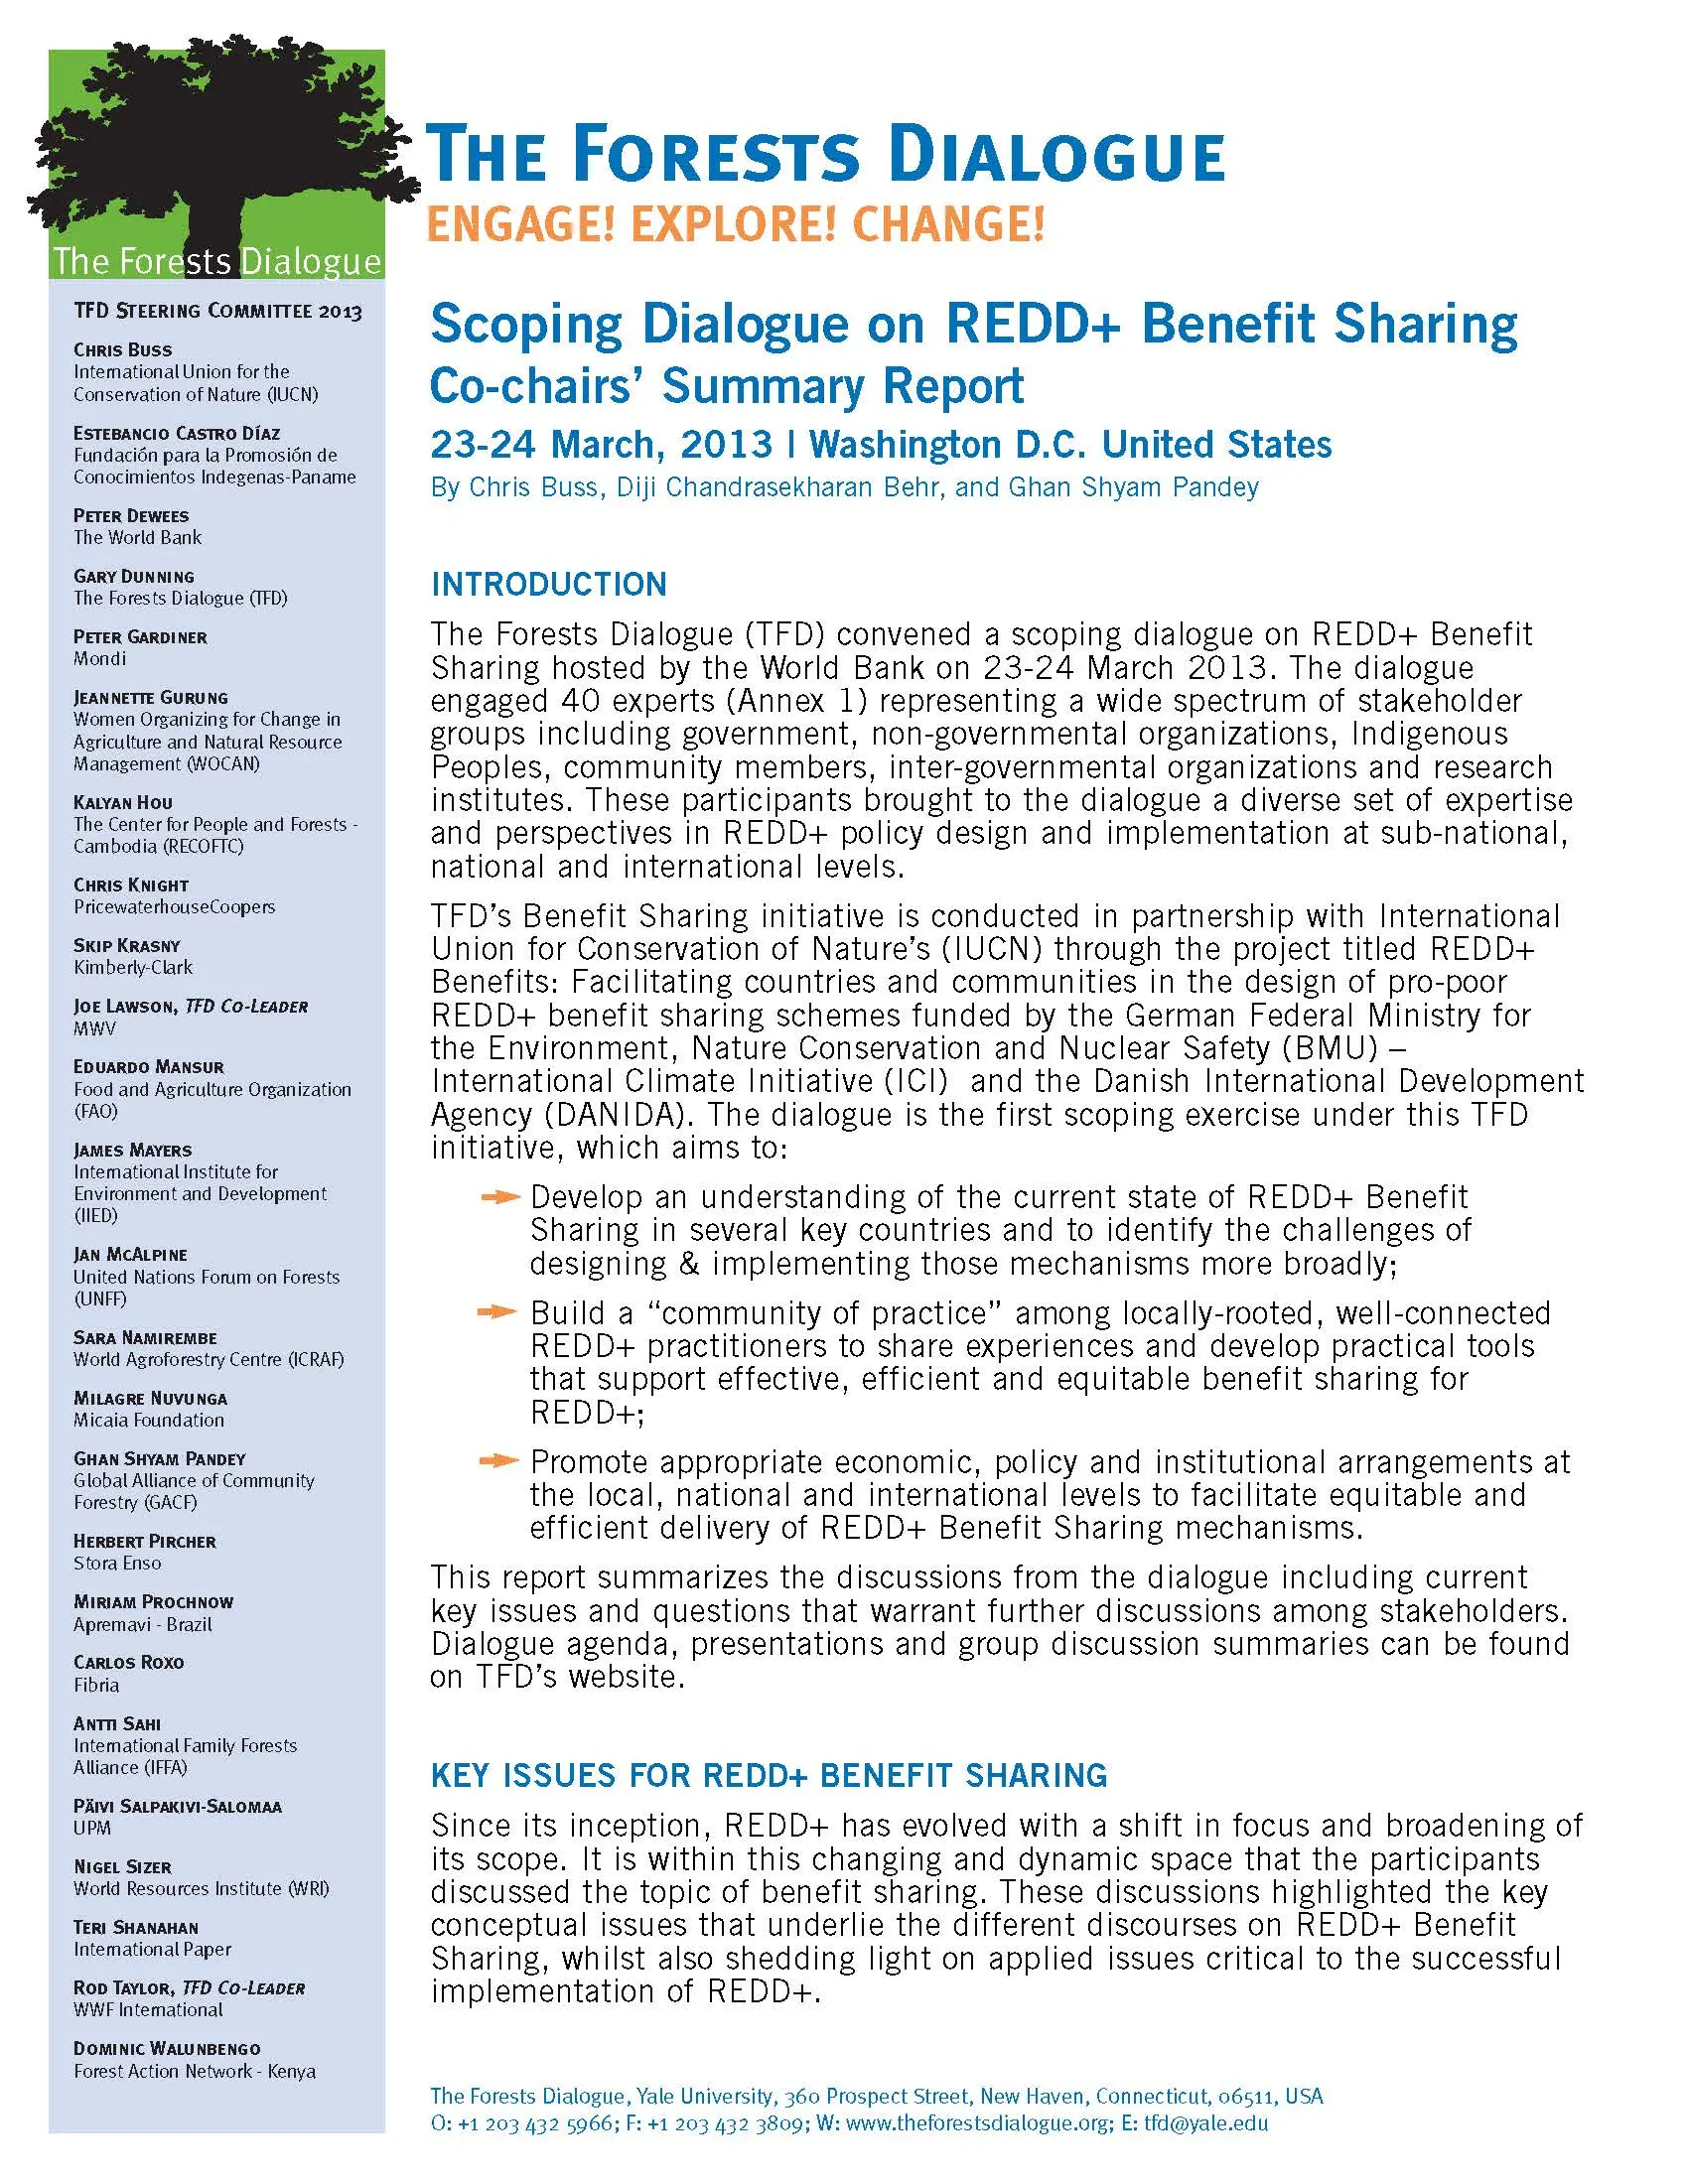 REDD+ Benefit Sharing-Co-chair's Summary Report